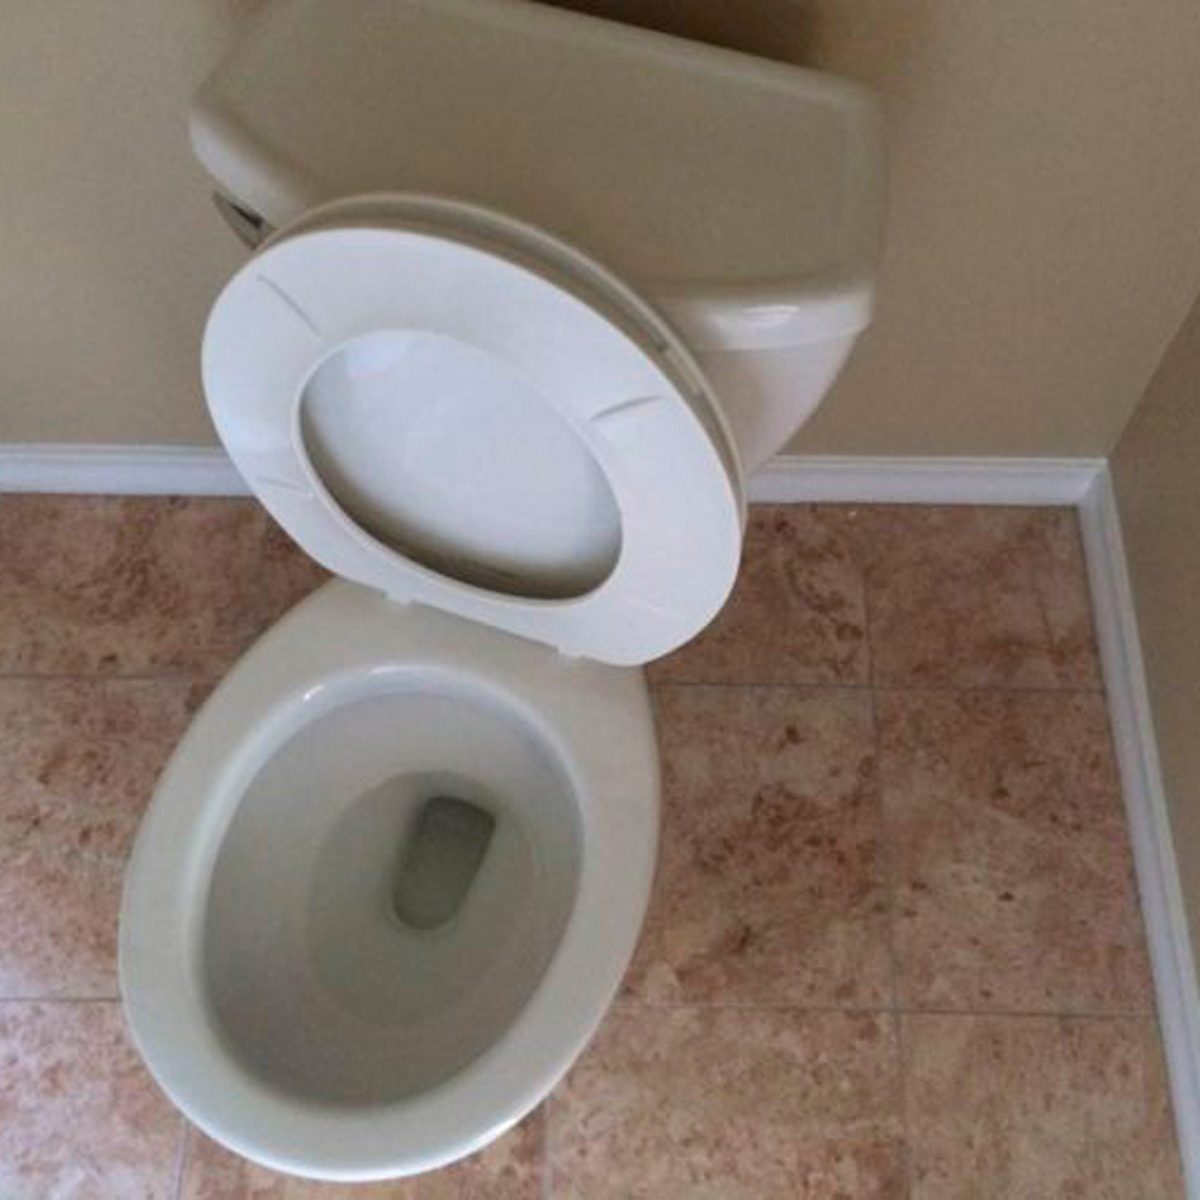 Fix Your Leaky Toilet With Our How-To And Troubleshooting Information